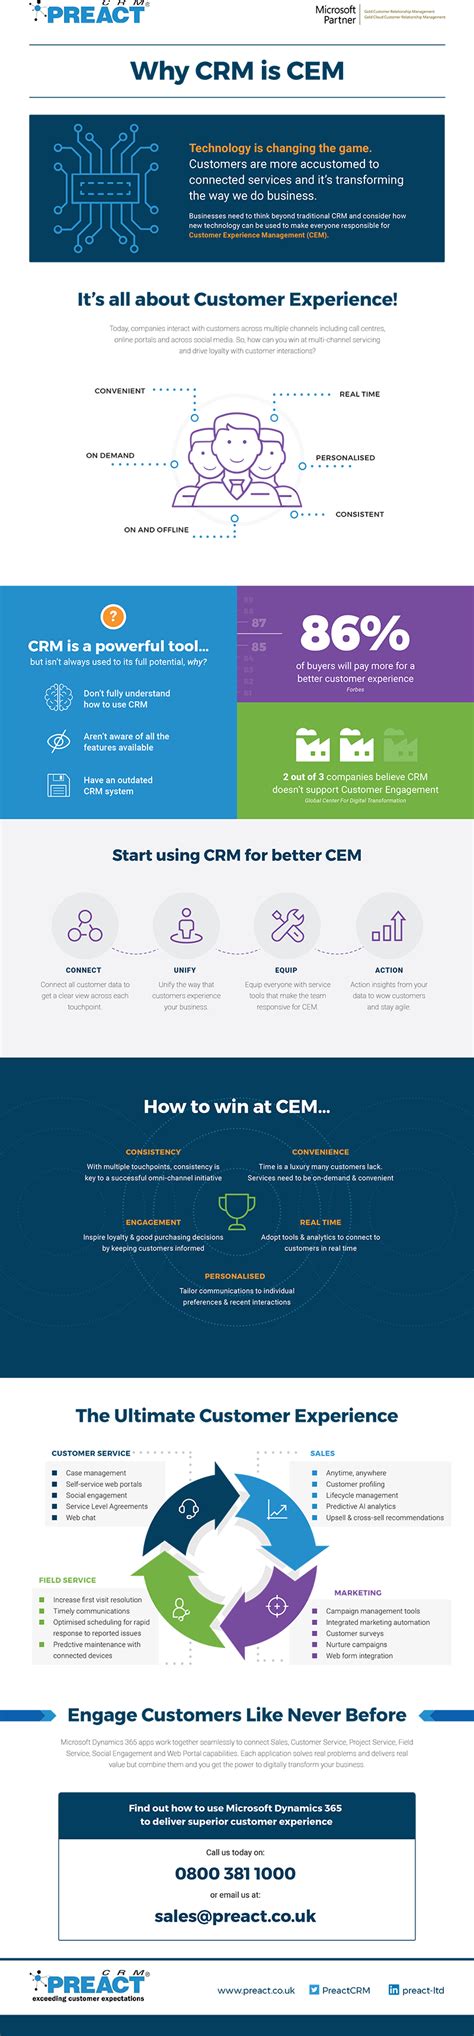 Why #CRM is #CEM - #Infographic #CX | Infographic, Crm ...